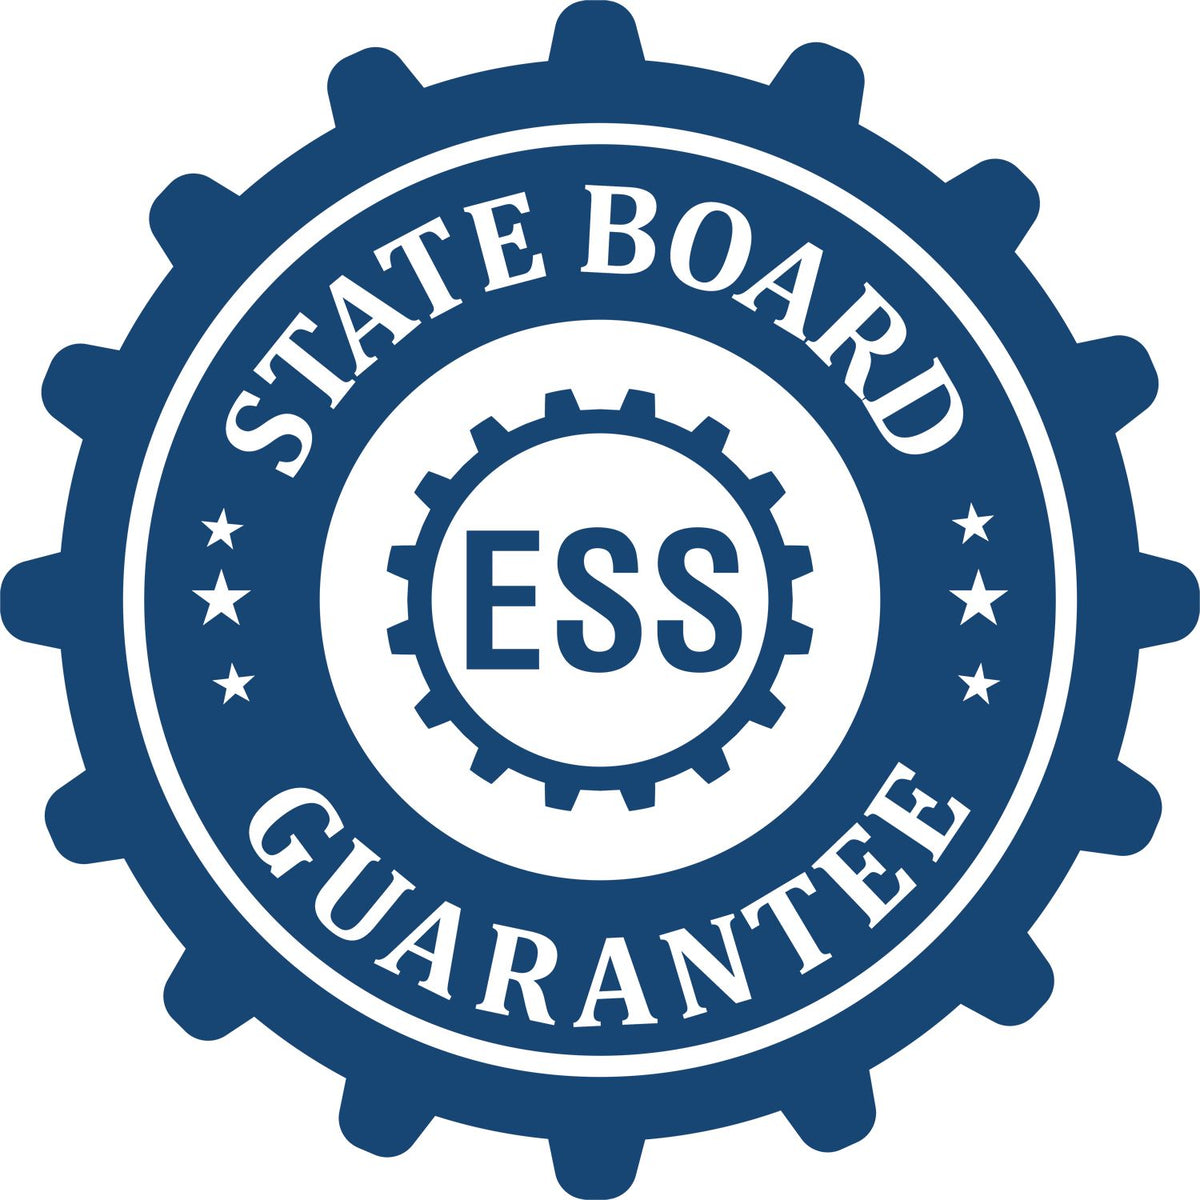 An emblem in a gear shape illustrating a state board guarantee for the Premium MaxLight Pre-Inked Connecticut Engineering Stamp product.